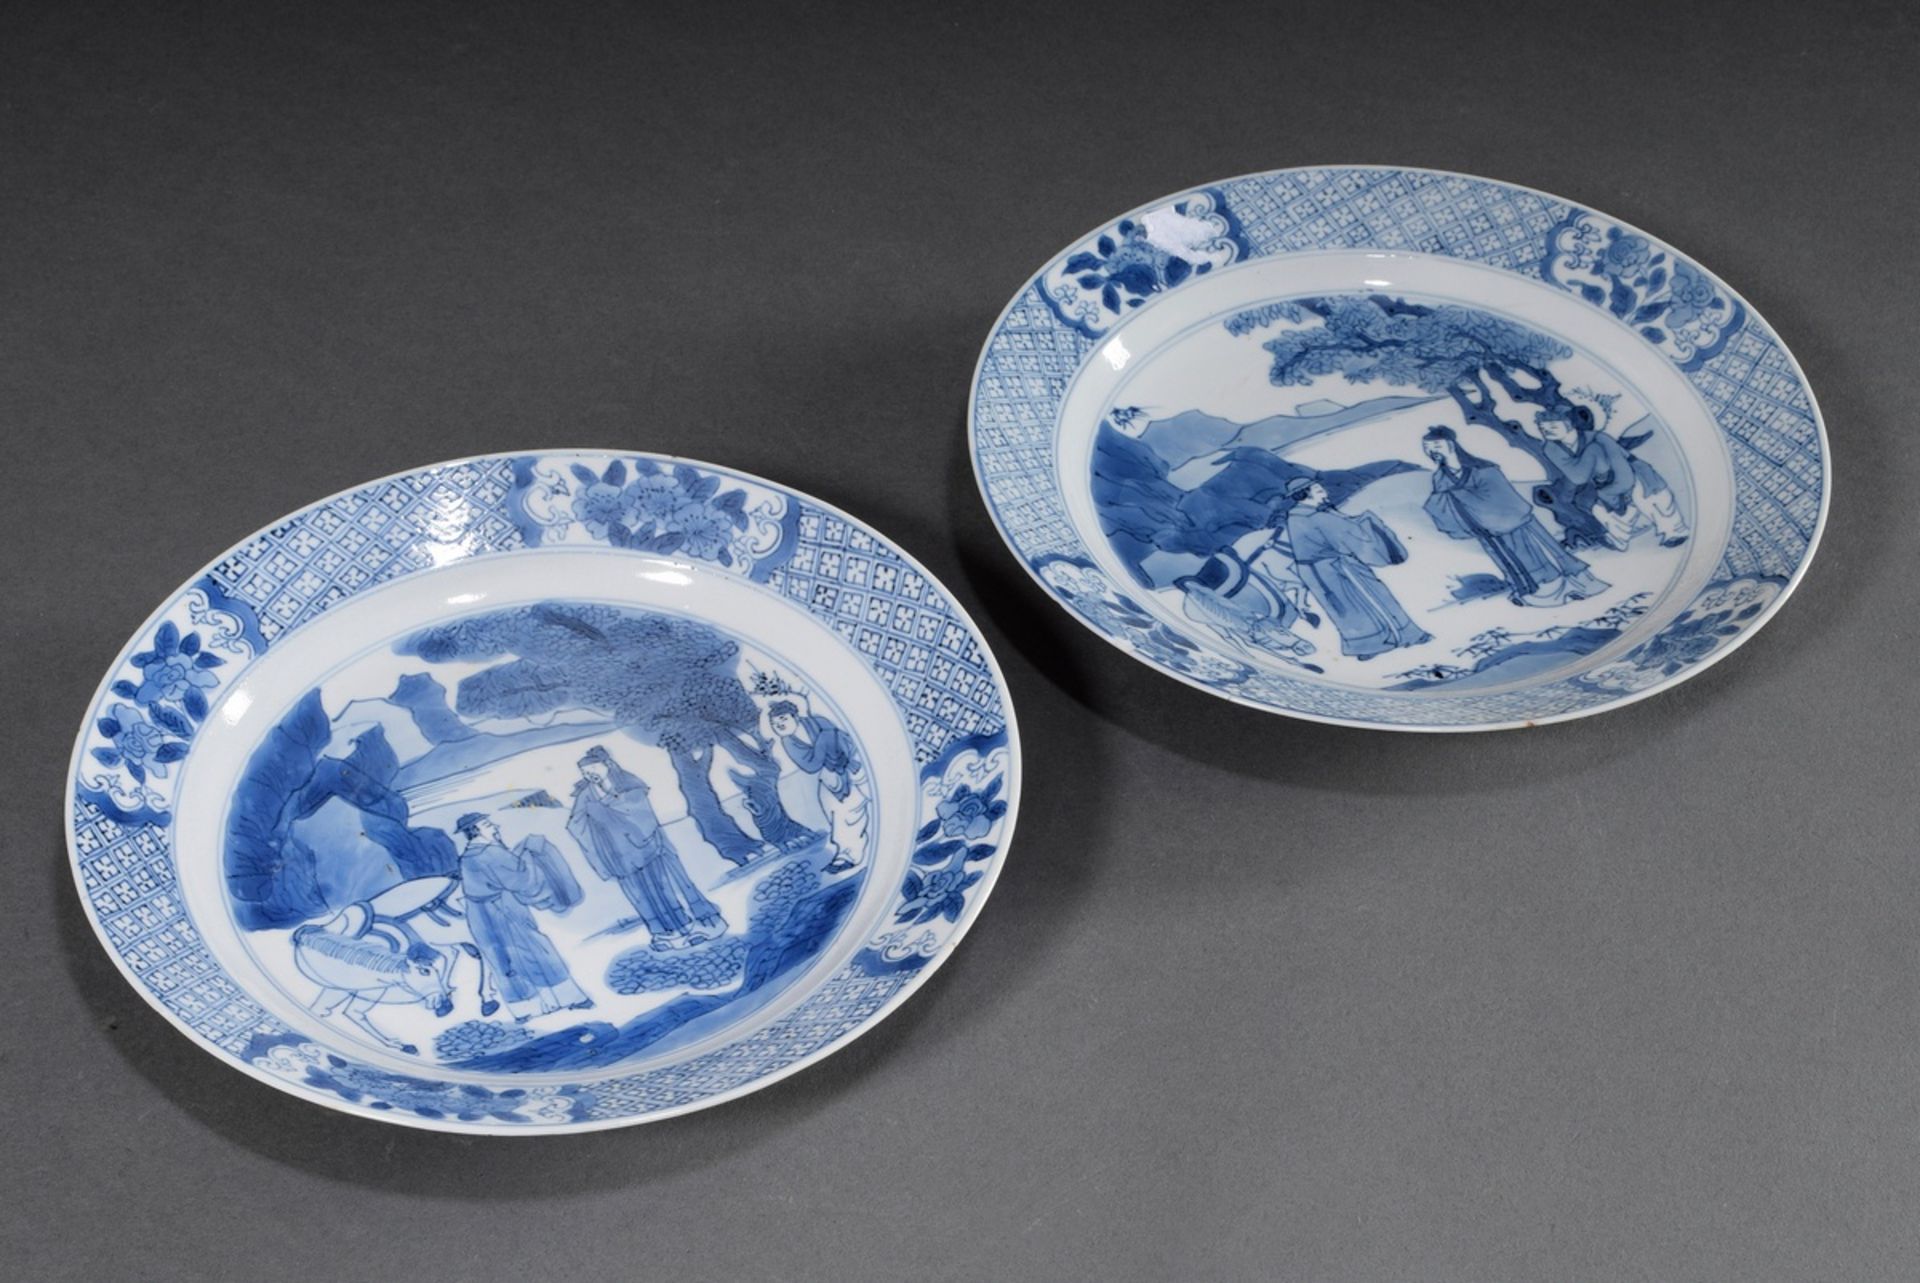 2 plates with blue painting scenes "Daoist sage on the way", 6character Chenghua mark in double rin - Image 2 of 6